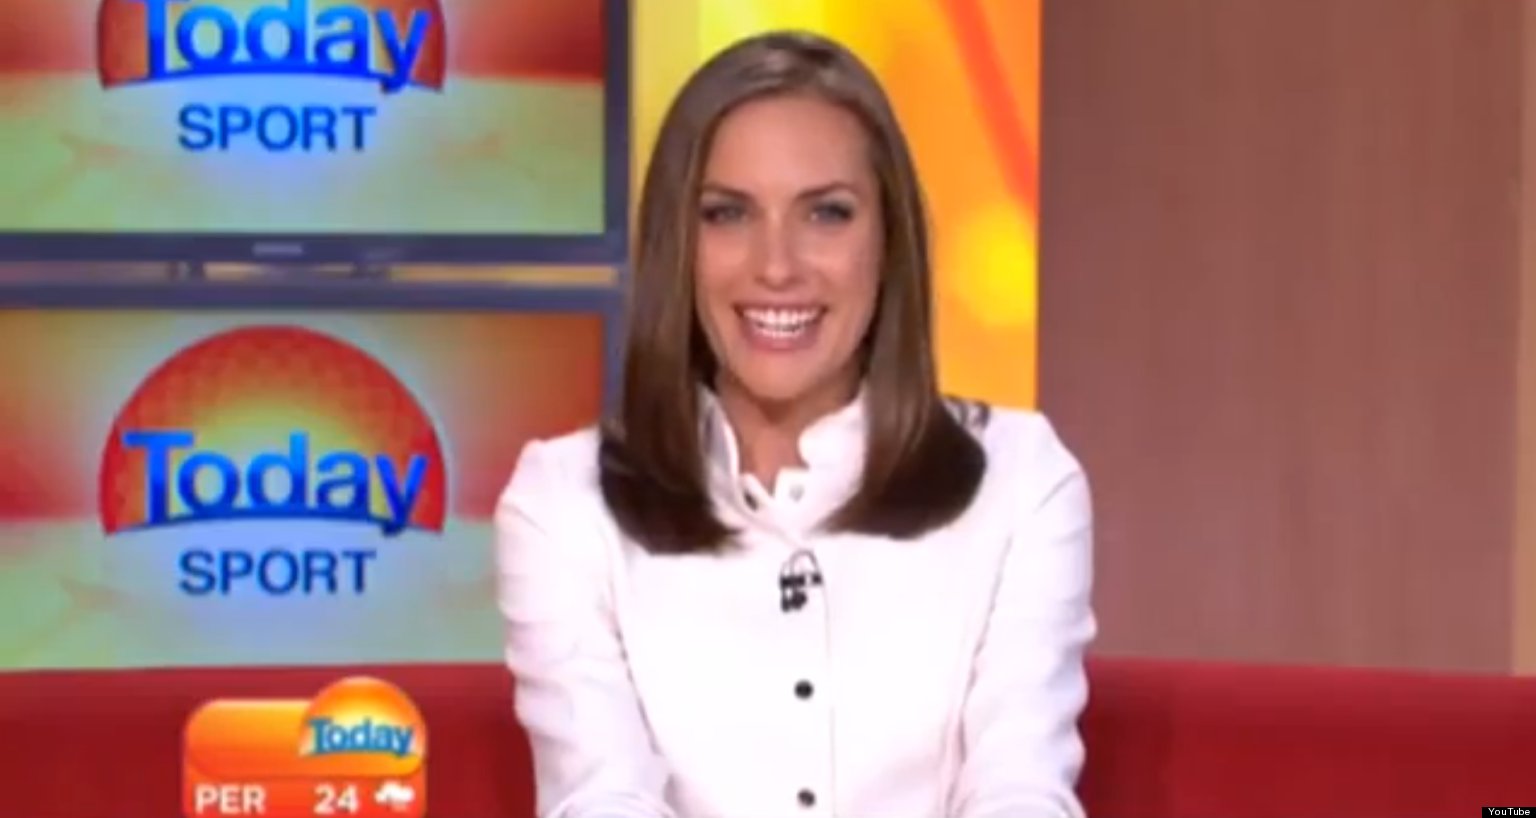 Australian Sports Reporter Roz Kelly Gets Pranked, Anchorman-Style (VIDEO) | HuffPost UK